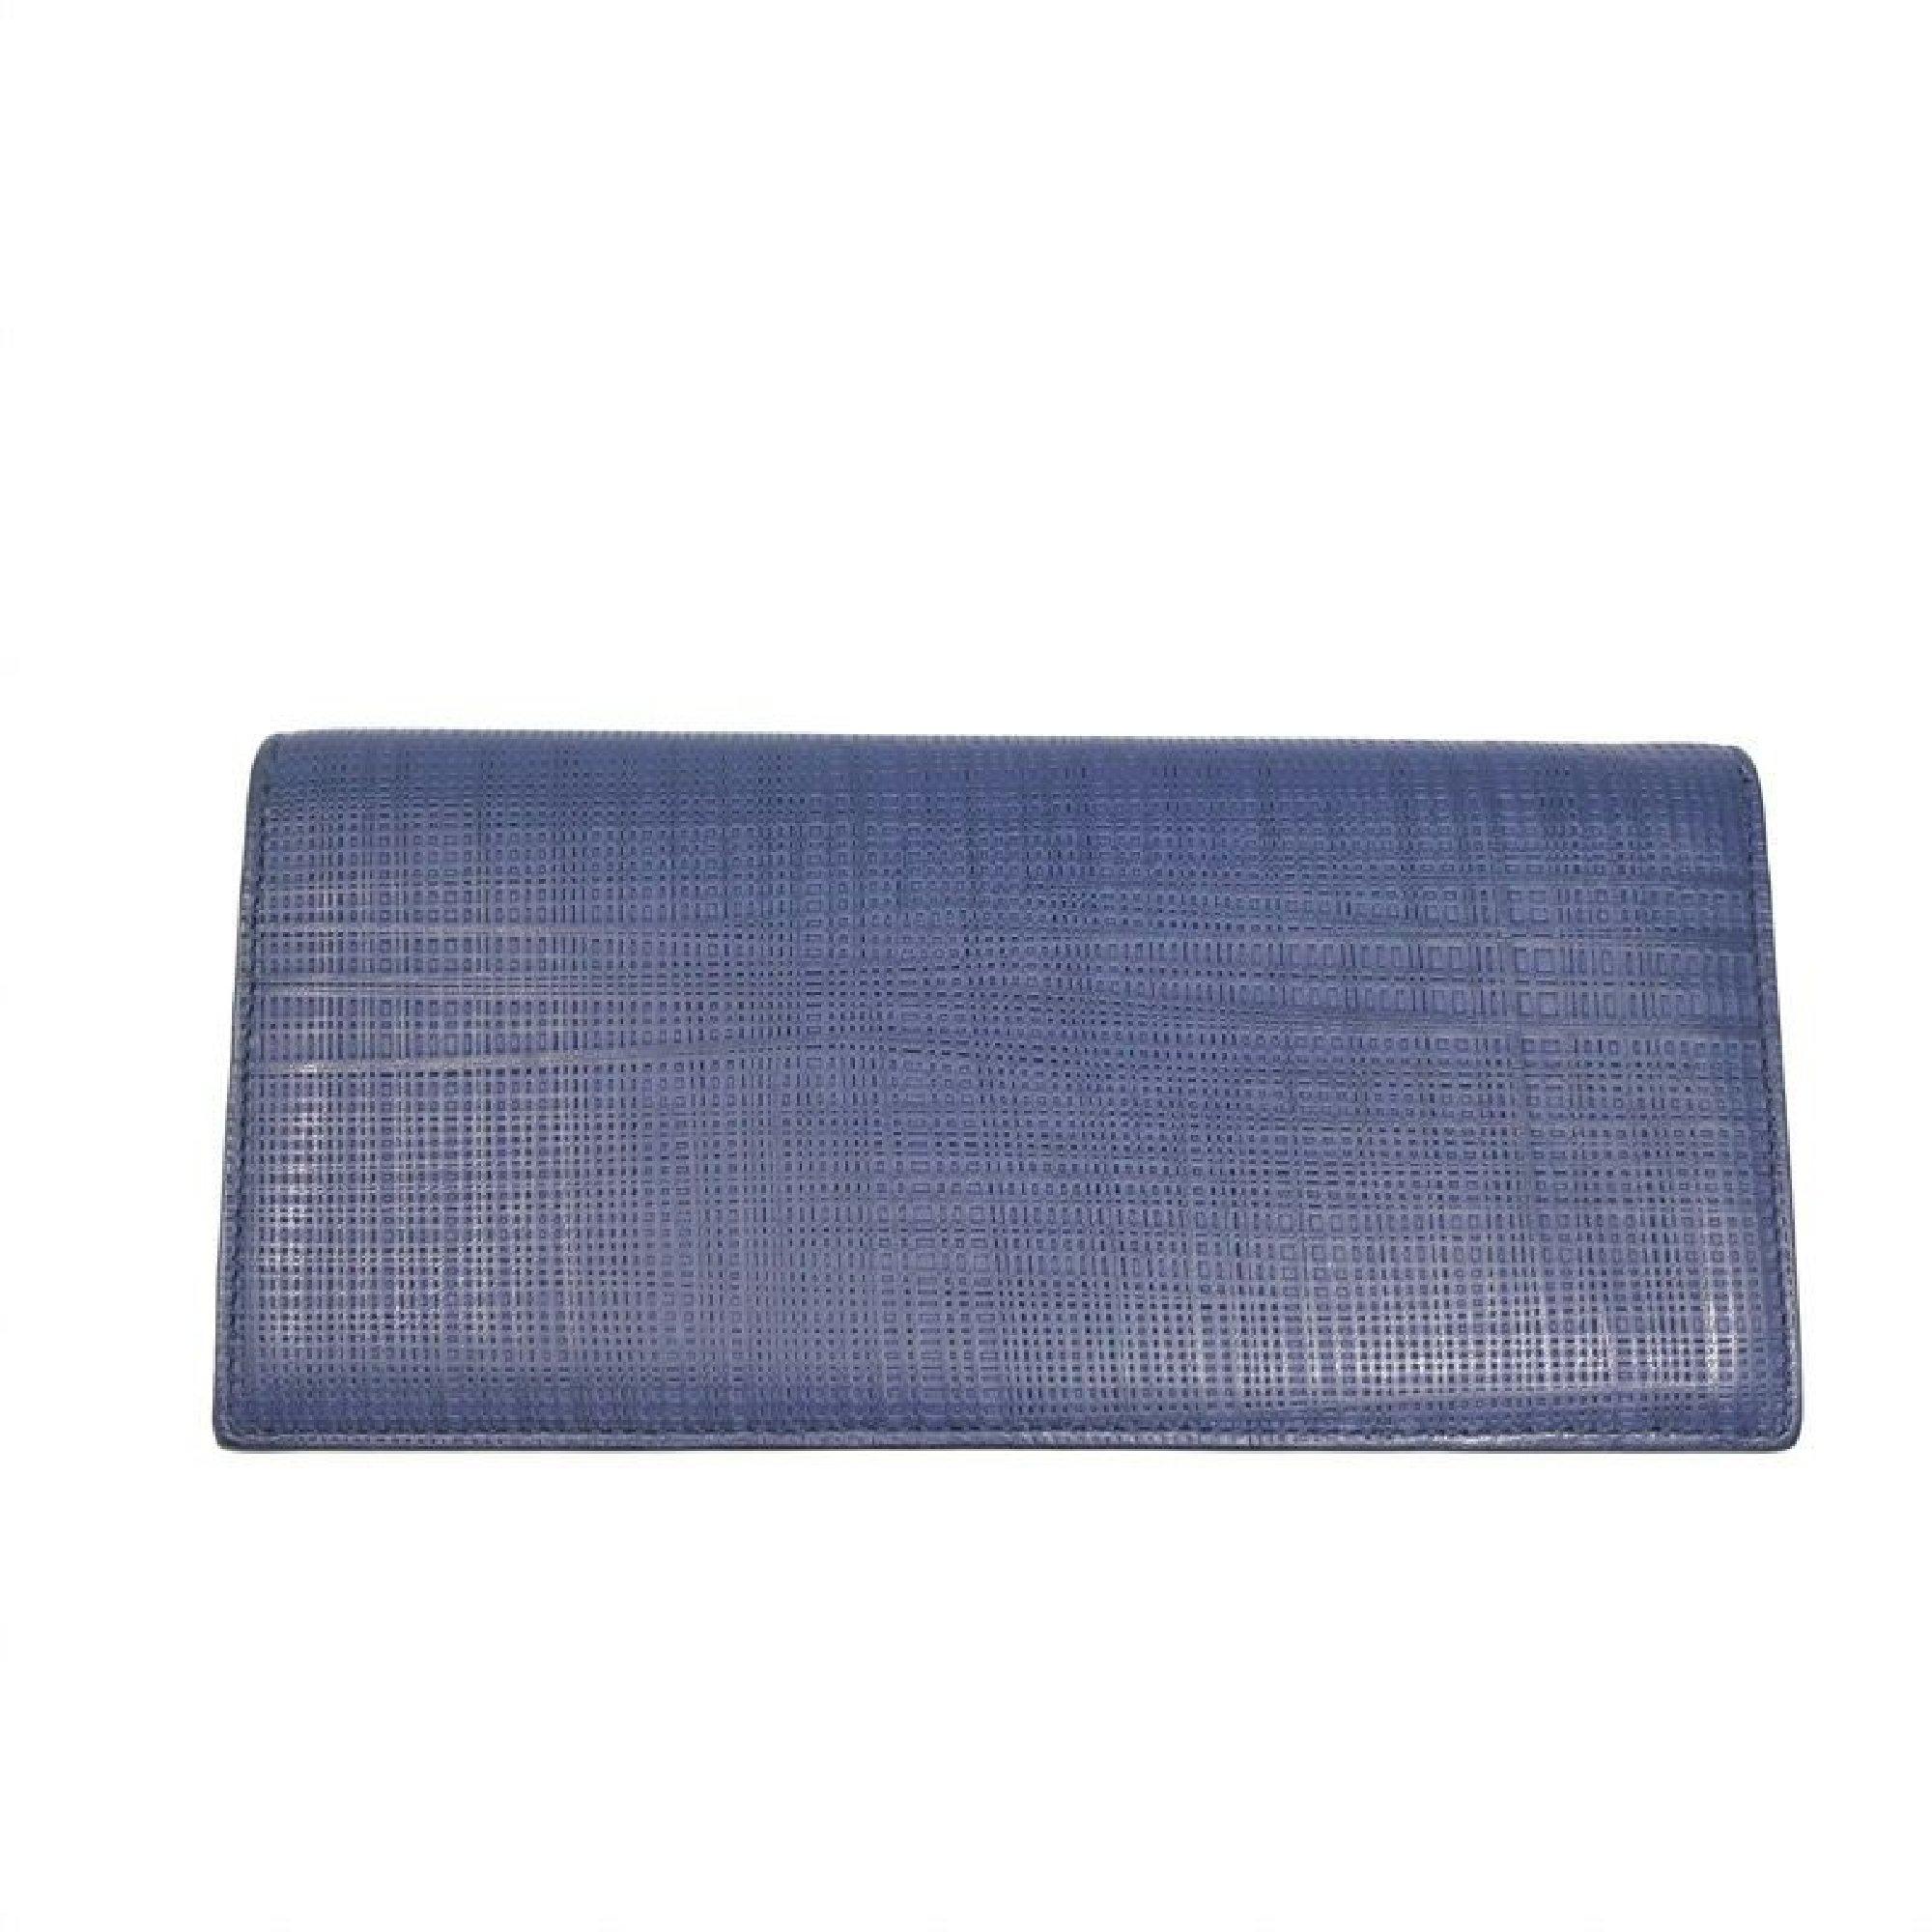 An authentic LOEWE long Horizontal Wallet Anagram Mens long wallet 101.88.978 Navy. The color is Navy. The outside material is Leather. The pattern is long  Horizontal  Wallet  Anagram. This item is Contemporary. The year of manufacture would be